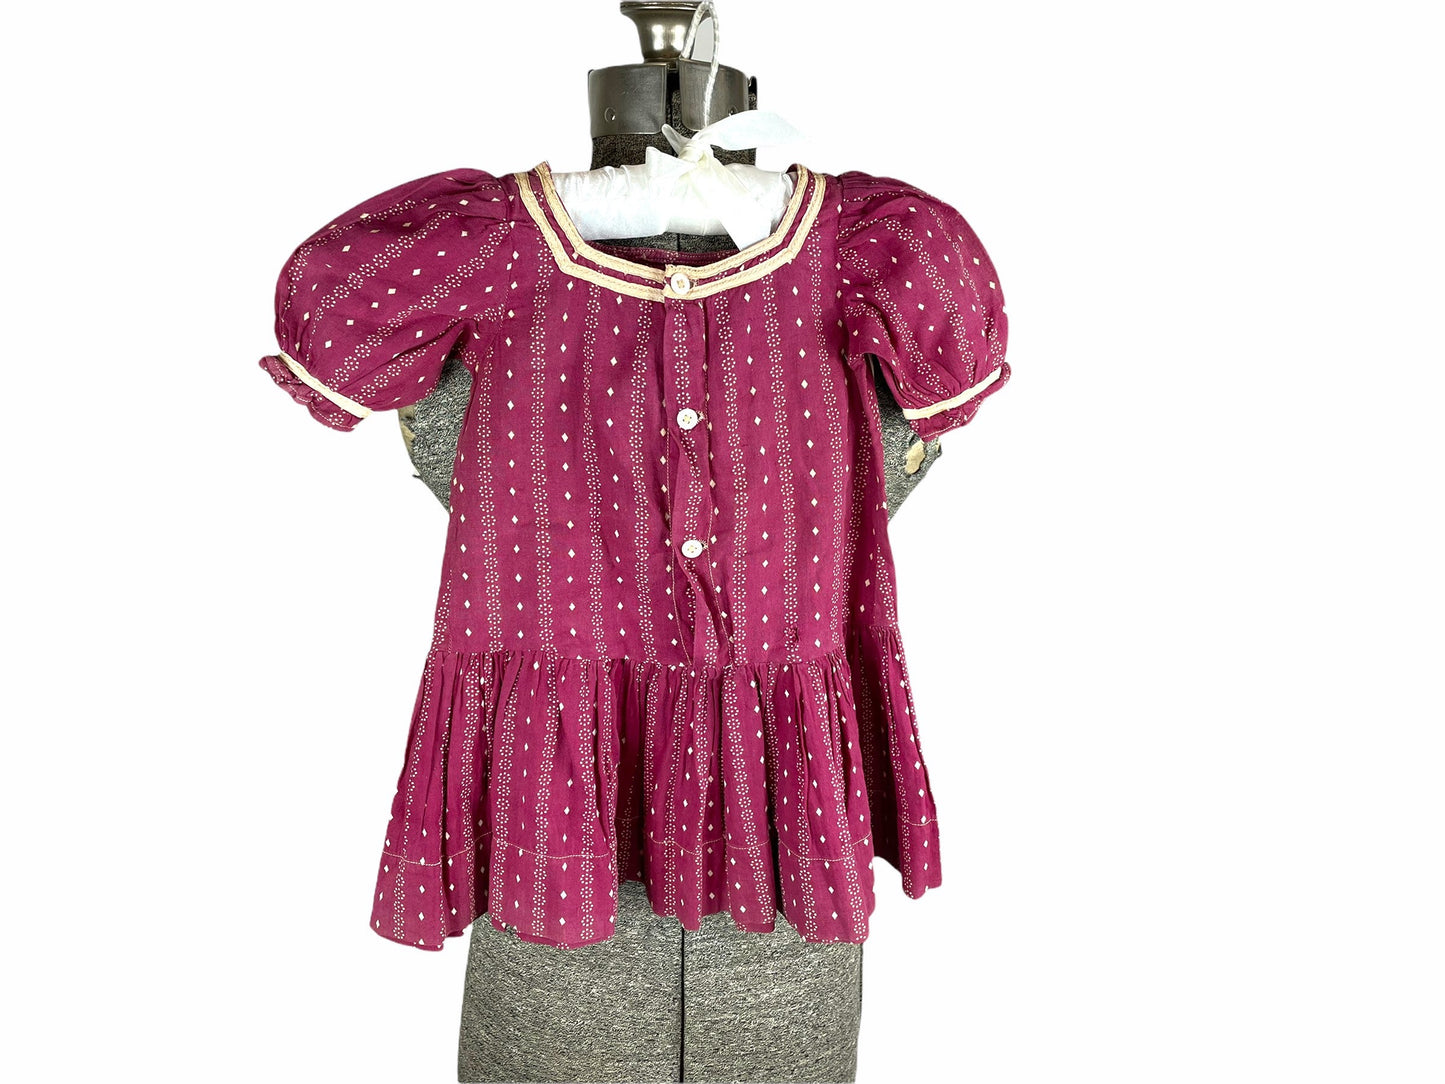 1900s Edwardian girls toddler dress cotton printed Size approx 2T